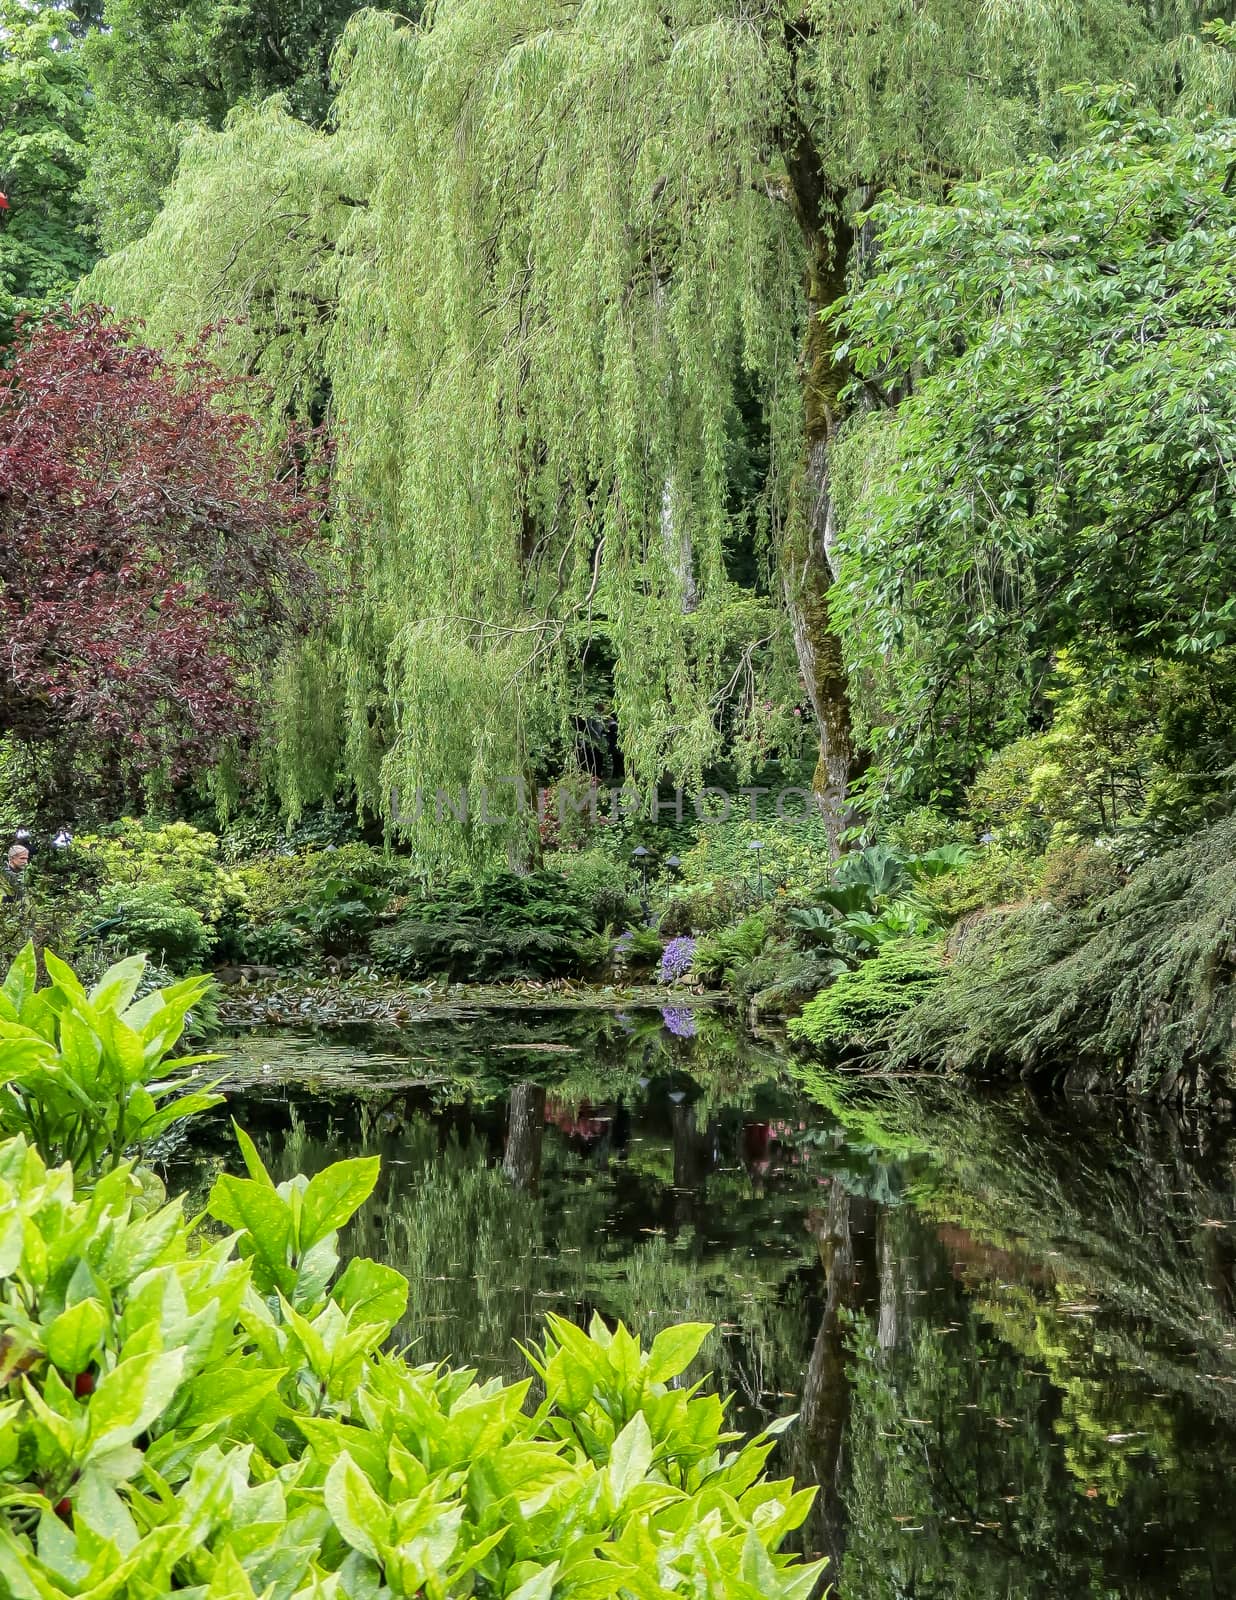 This lovely gardens in Victoria, Canada is a popular tourist attraction.